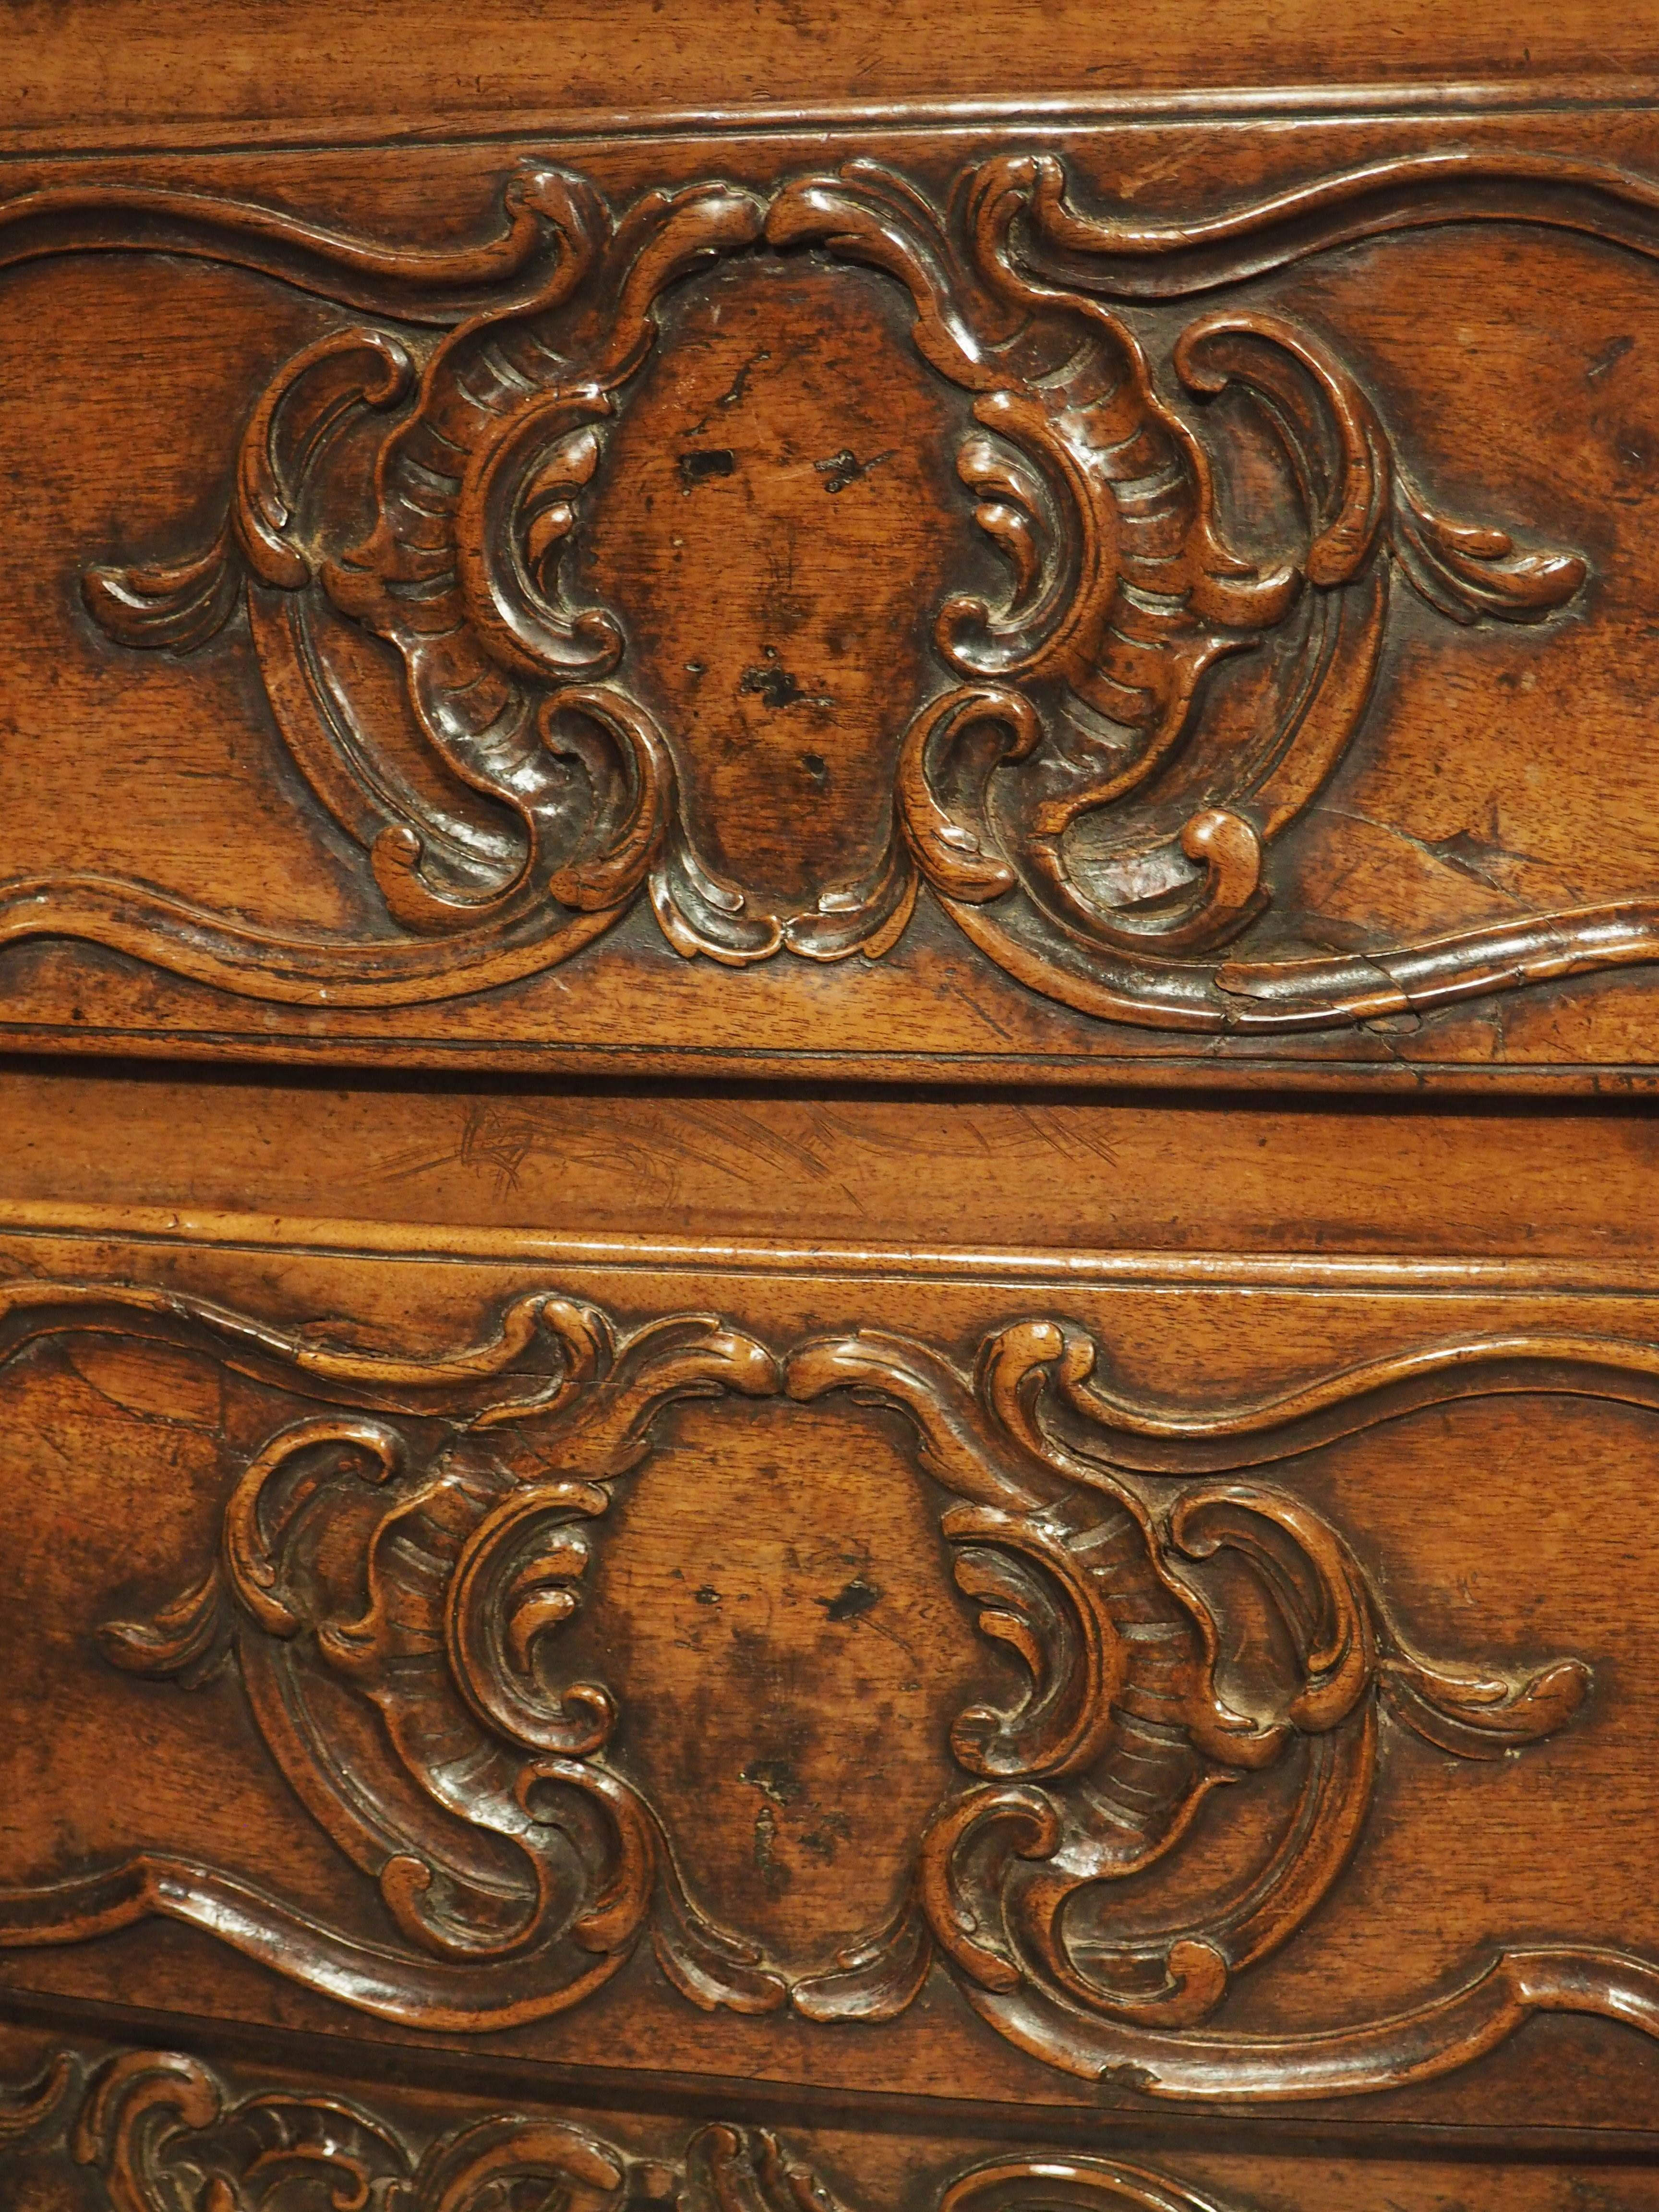 Featuring Rococo elements from the period of Louis XV, this walnut commode was hand-carved in Arles, France, during the 18th century. The chest of drawers is quite unusual in that it is only 36 inches wide, and the facades have subtle curves,